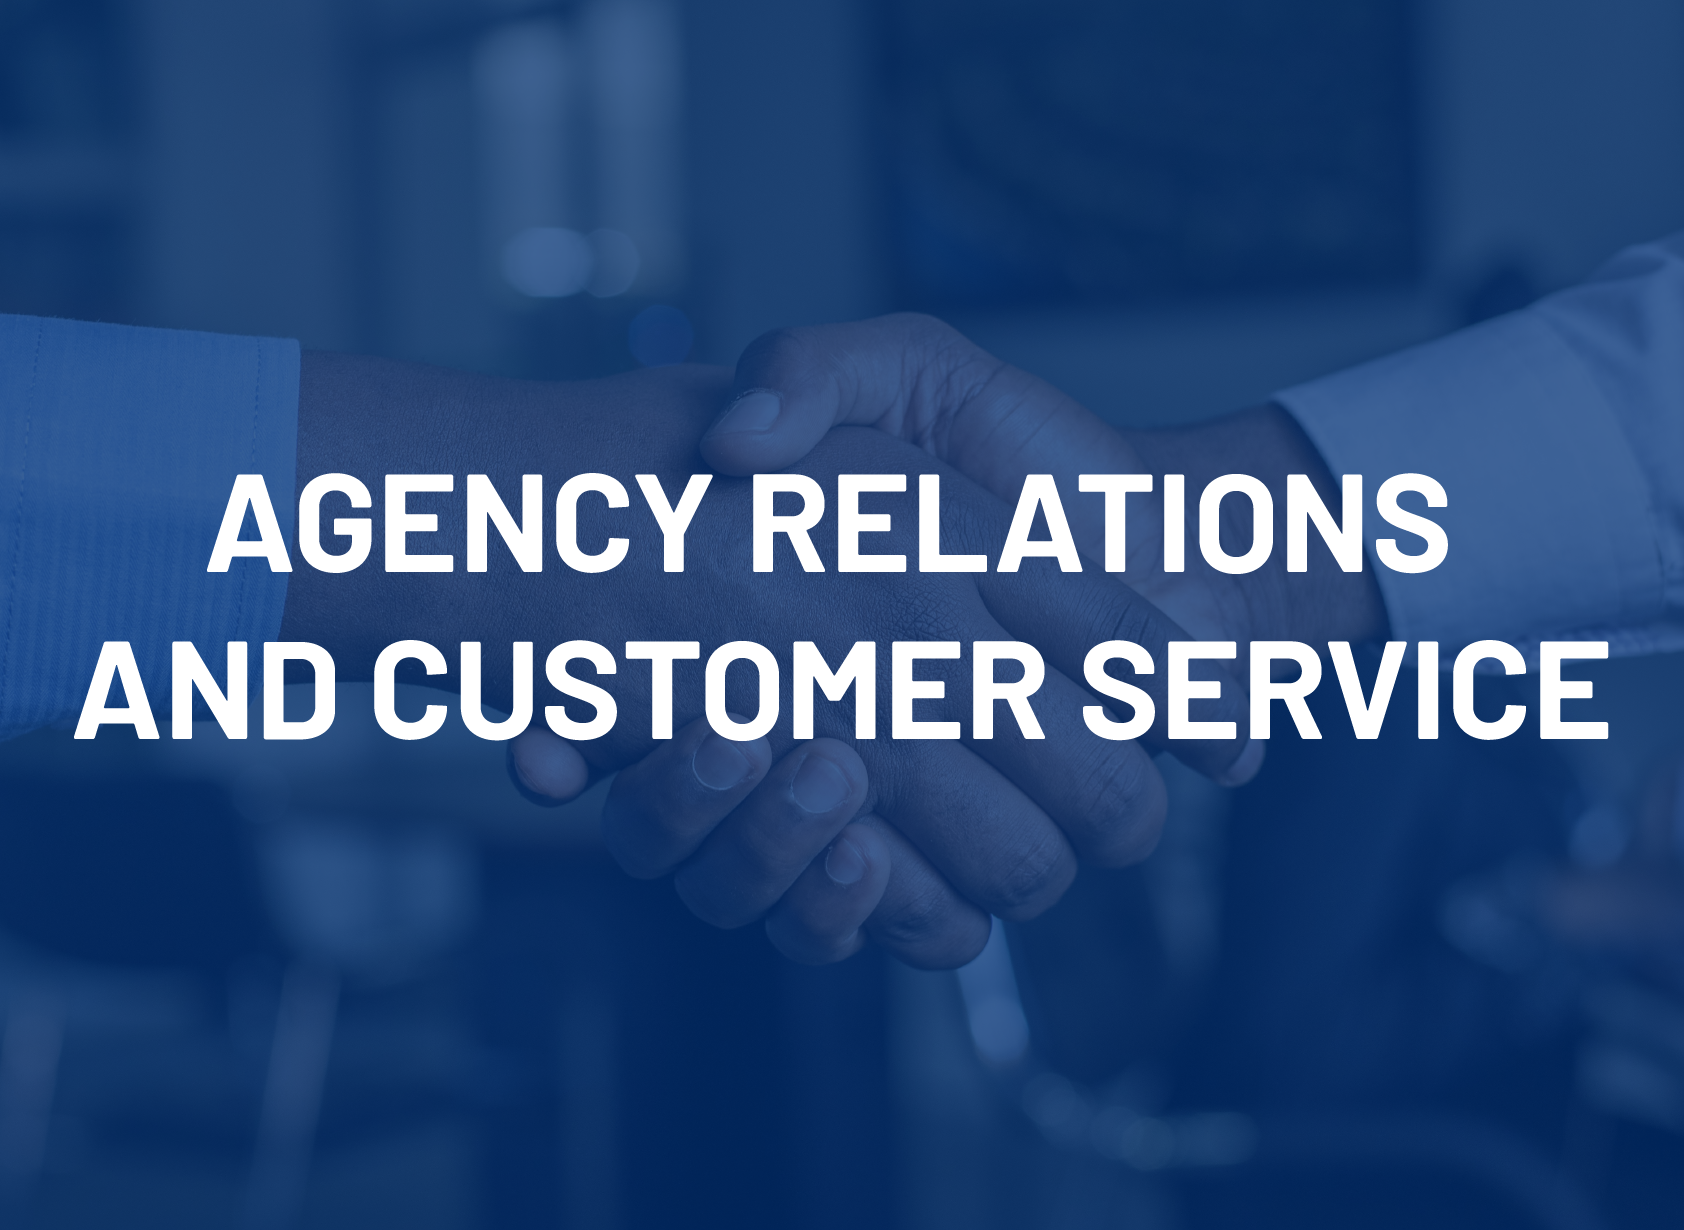 Agency Relations and Customer Service